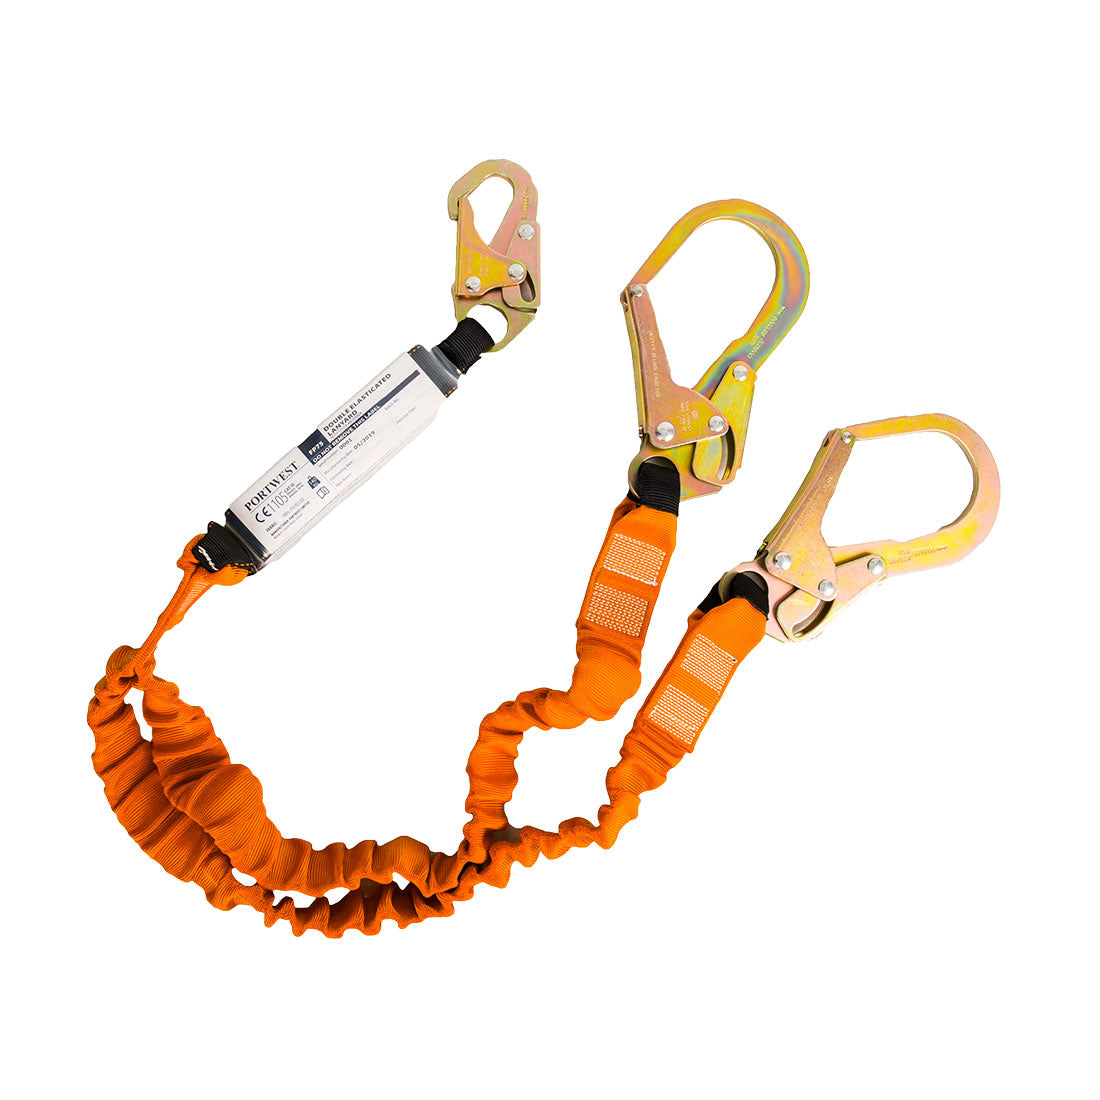 Portwest Double 140kg Lanyard with Shock Absorber